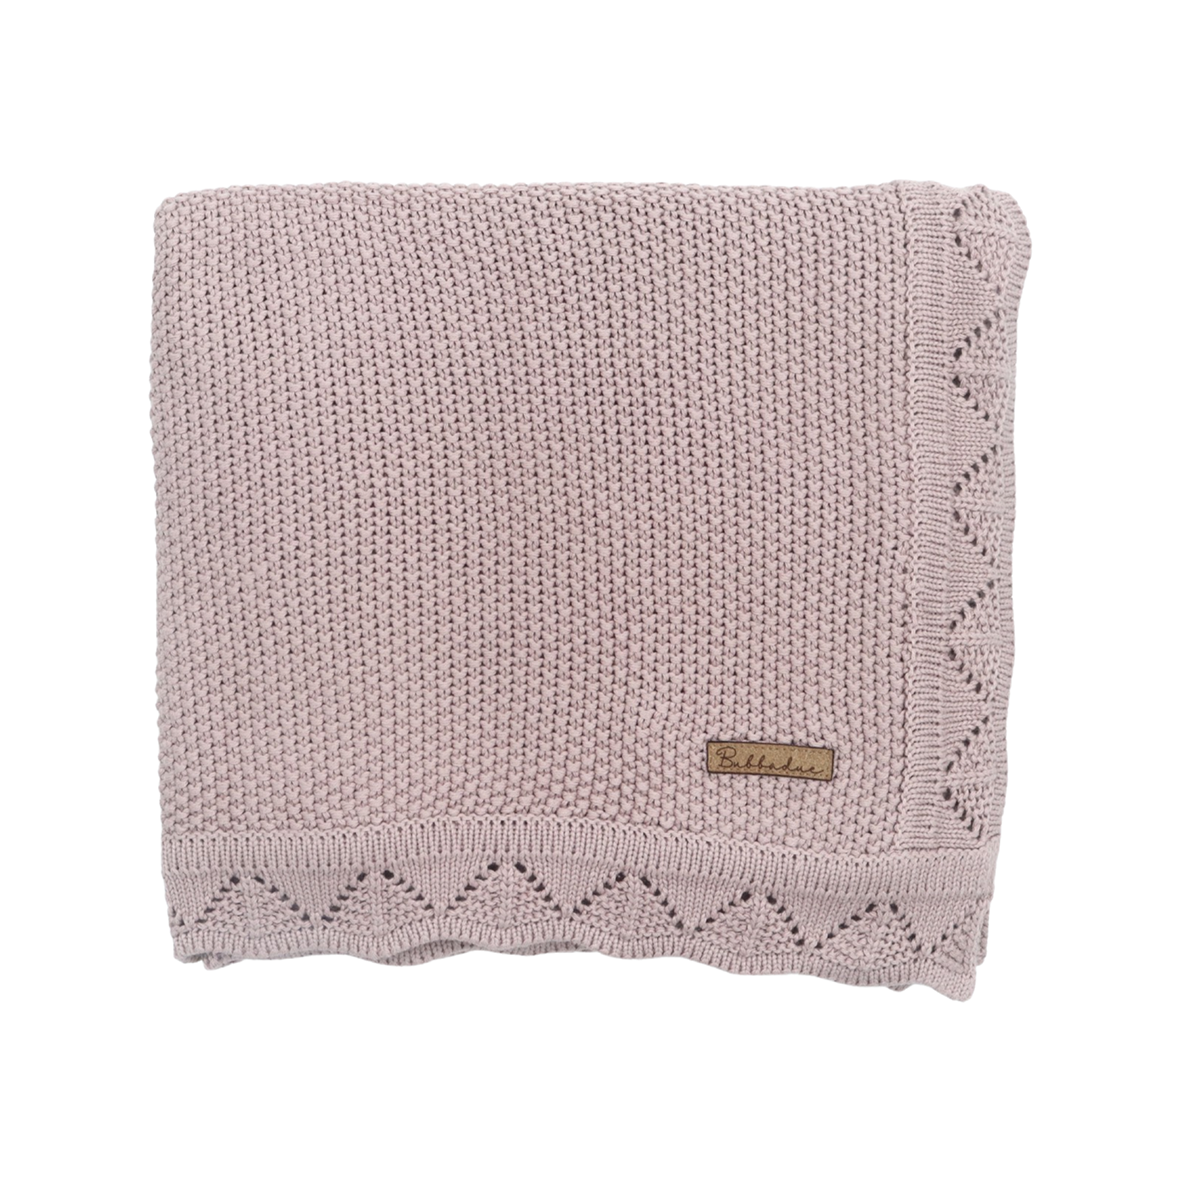 Bubbadue Luxury Knitted Baby Blankets - Bubbadue